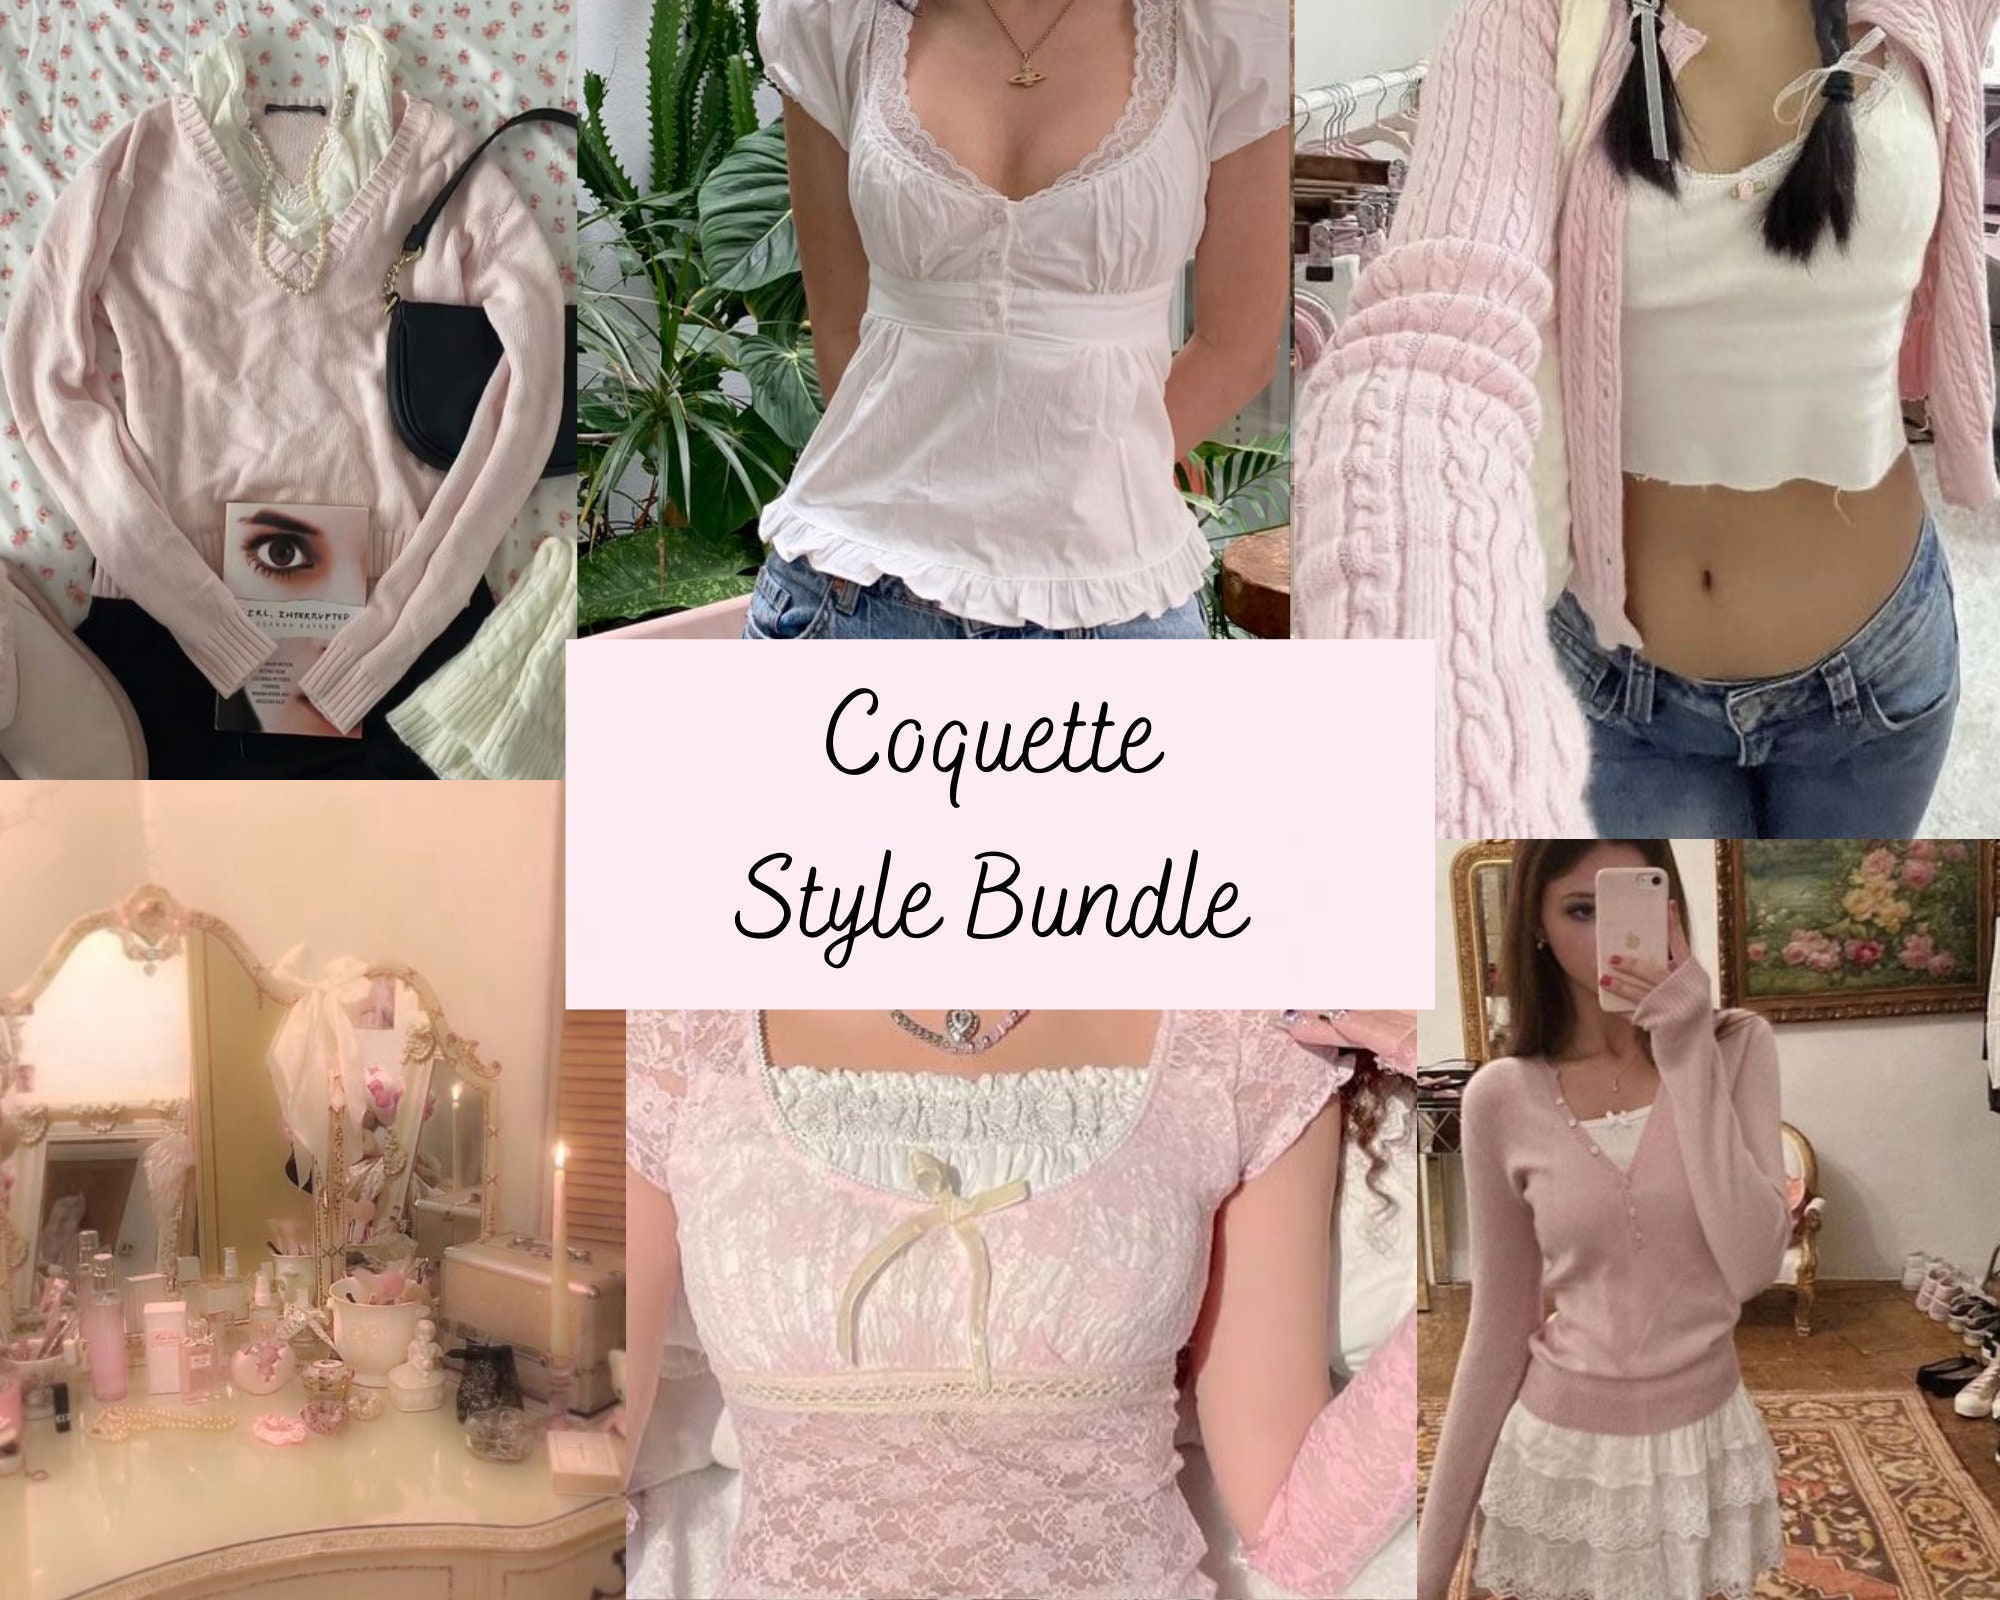 Coquette Style Bundle aesthetic clothing mystery box